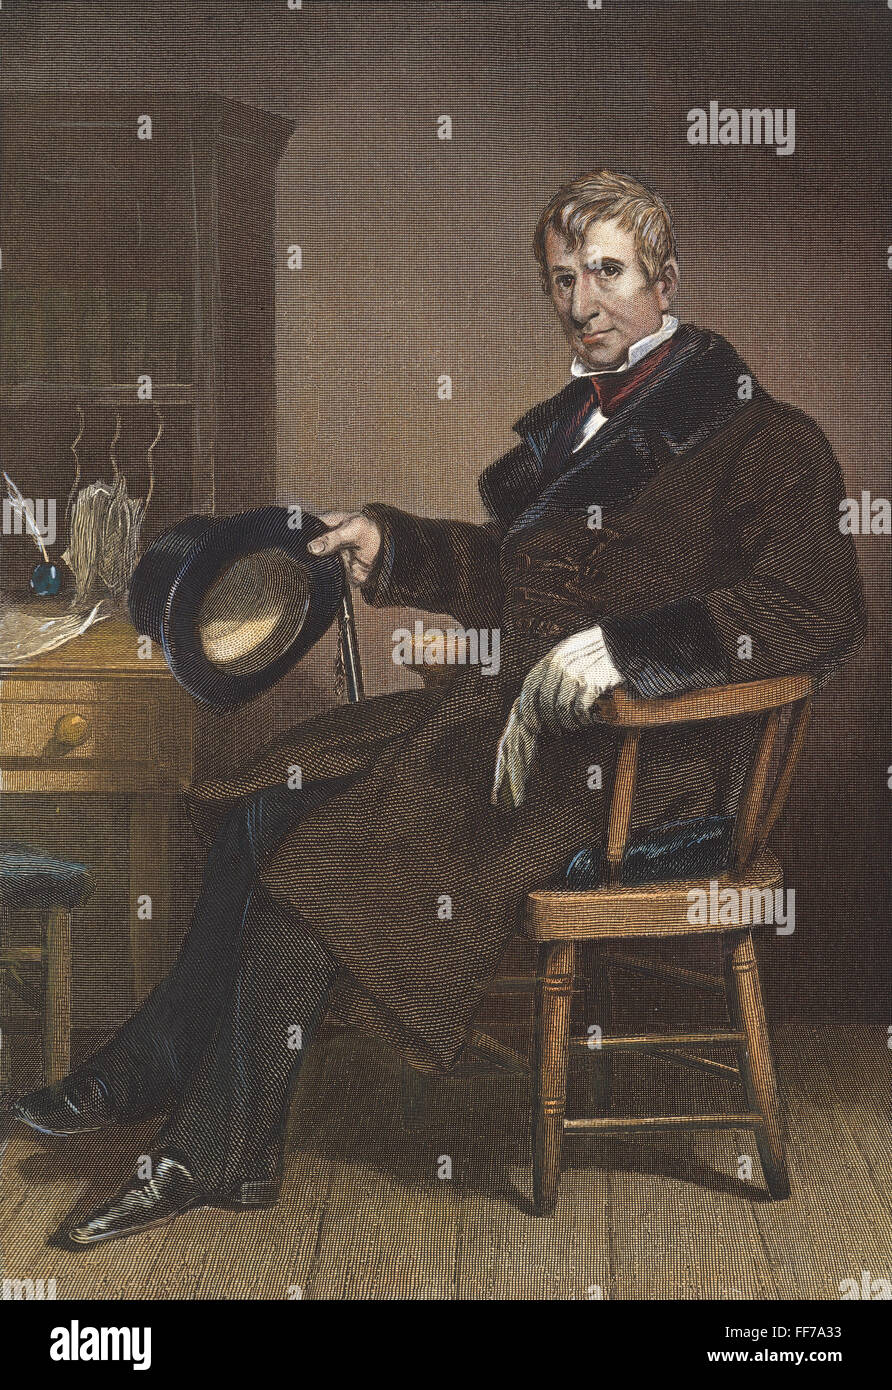 W. H. HARRISON (1773-1841). /nColored engraving, 19th century. Stock Photo